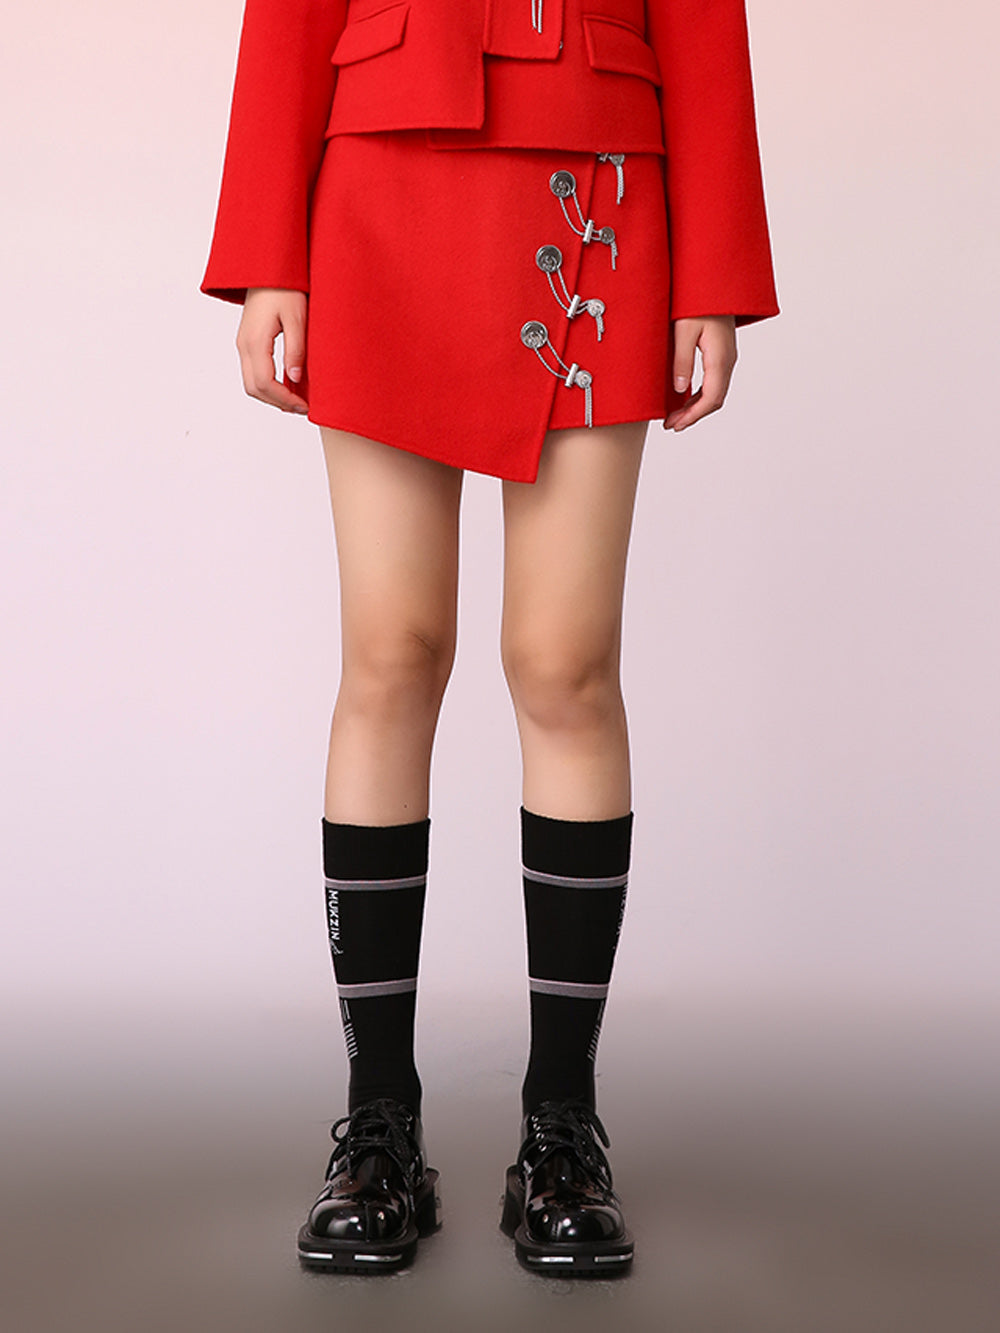 MUKZIN Charming Fashionable Red Simple Skirt